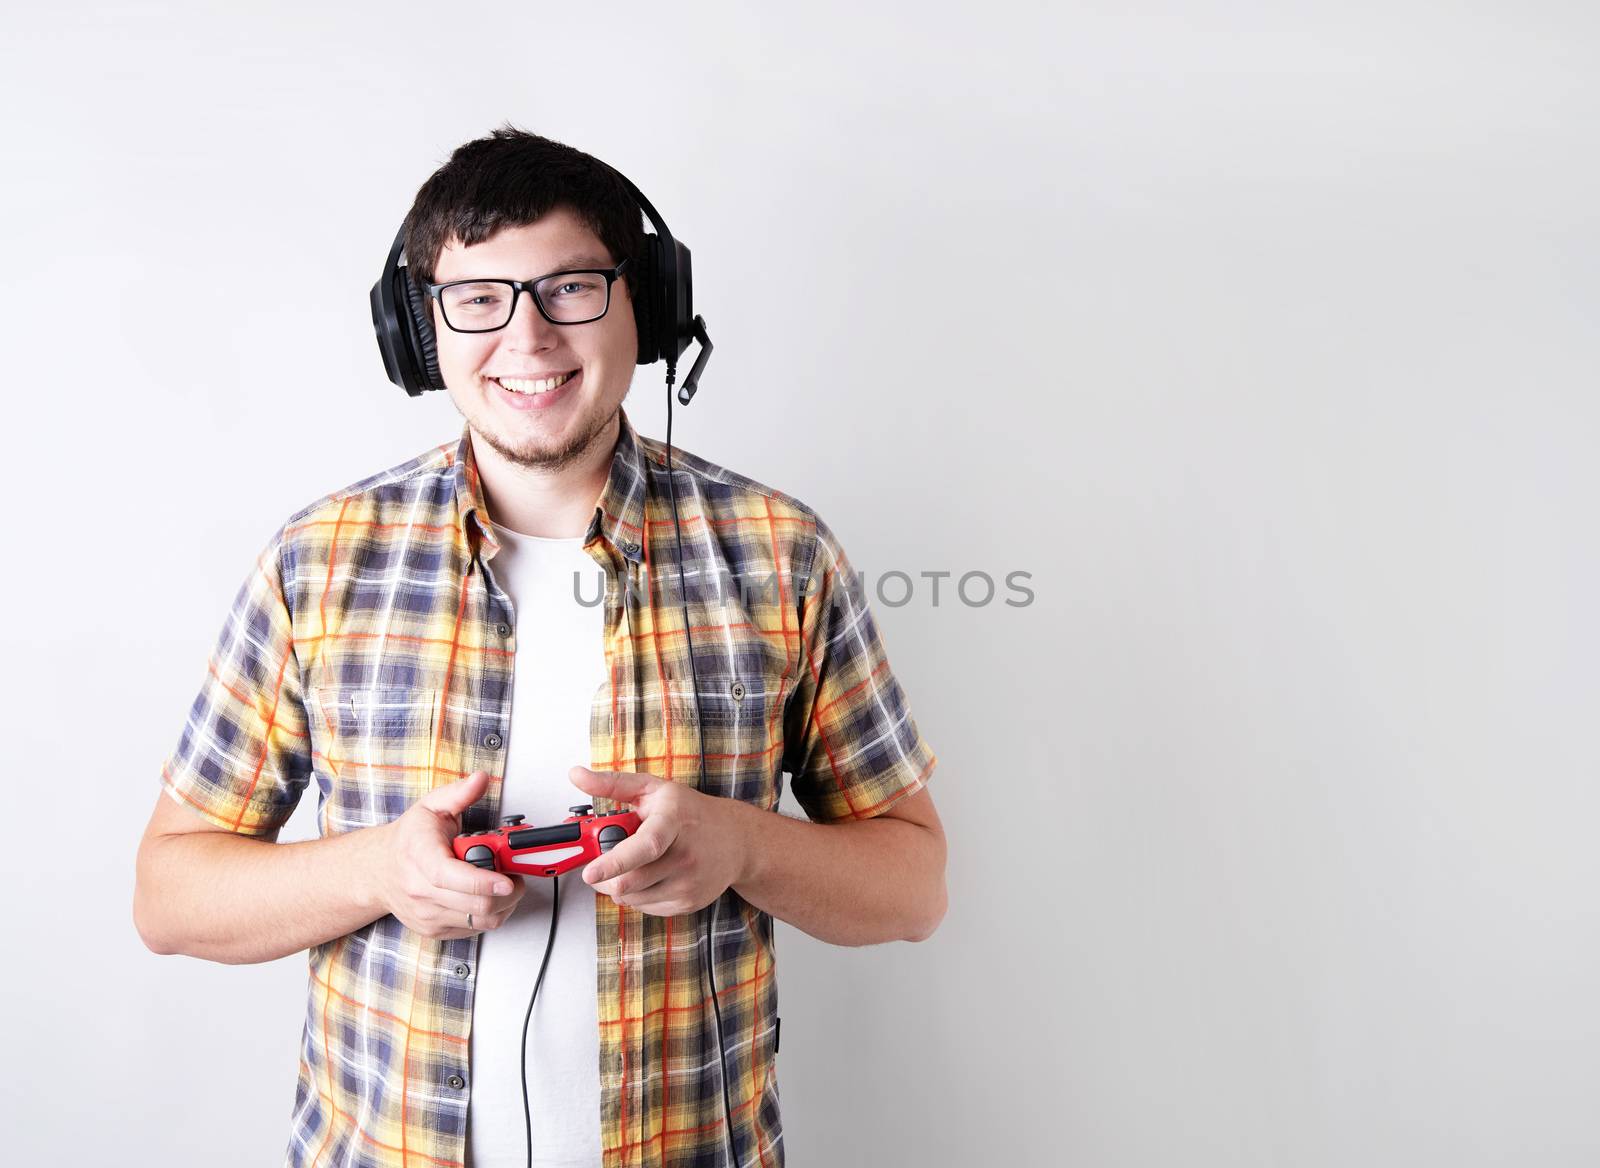 Stay home. Smiling young man playing video games holding a joystick isolated on gray background with copy space